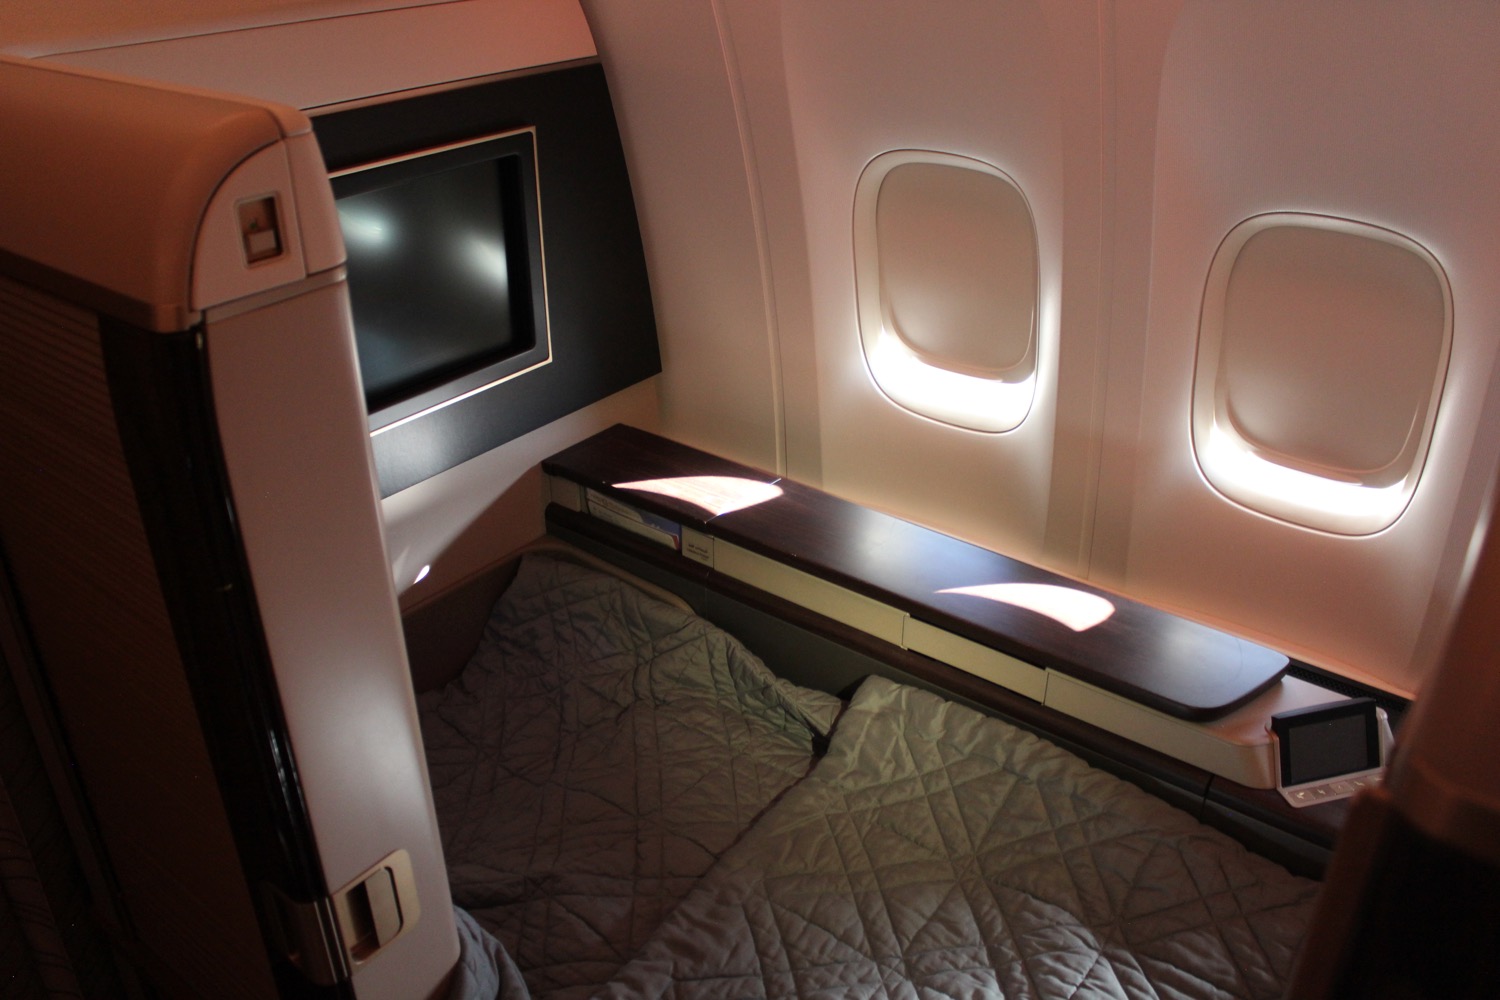 airplane bed